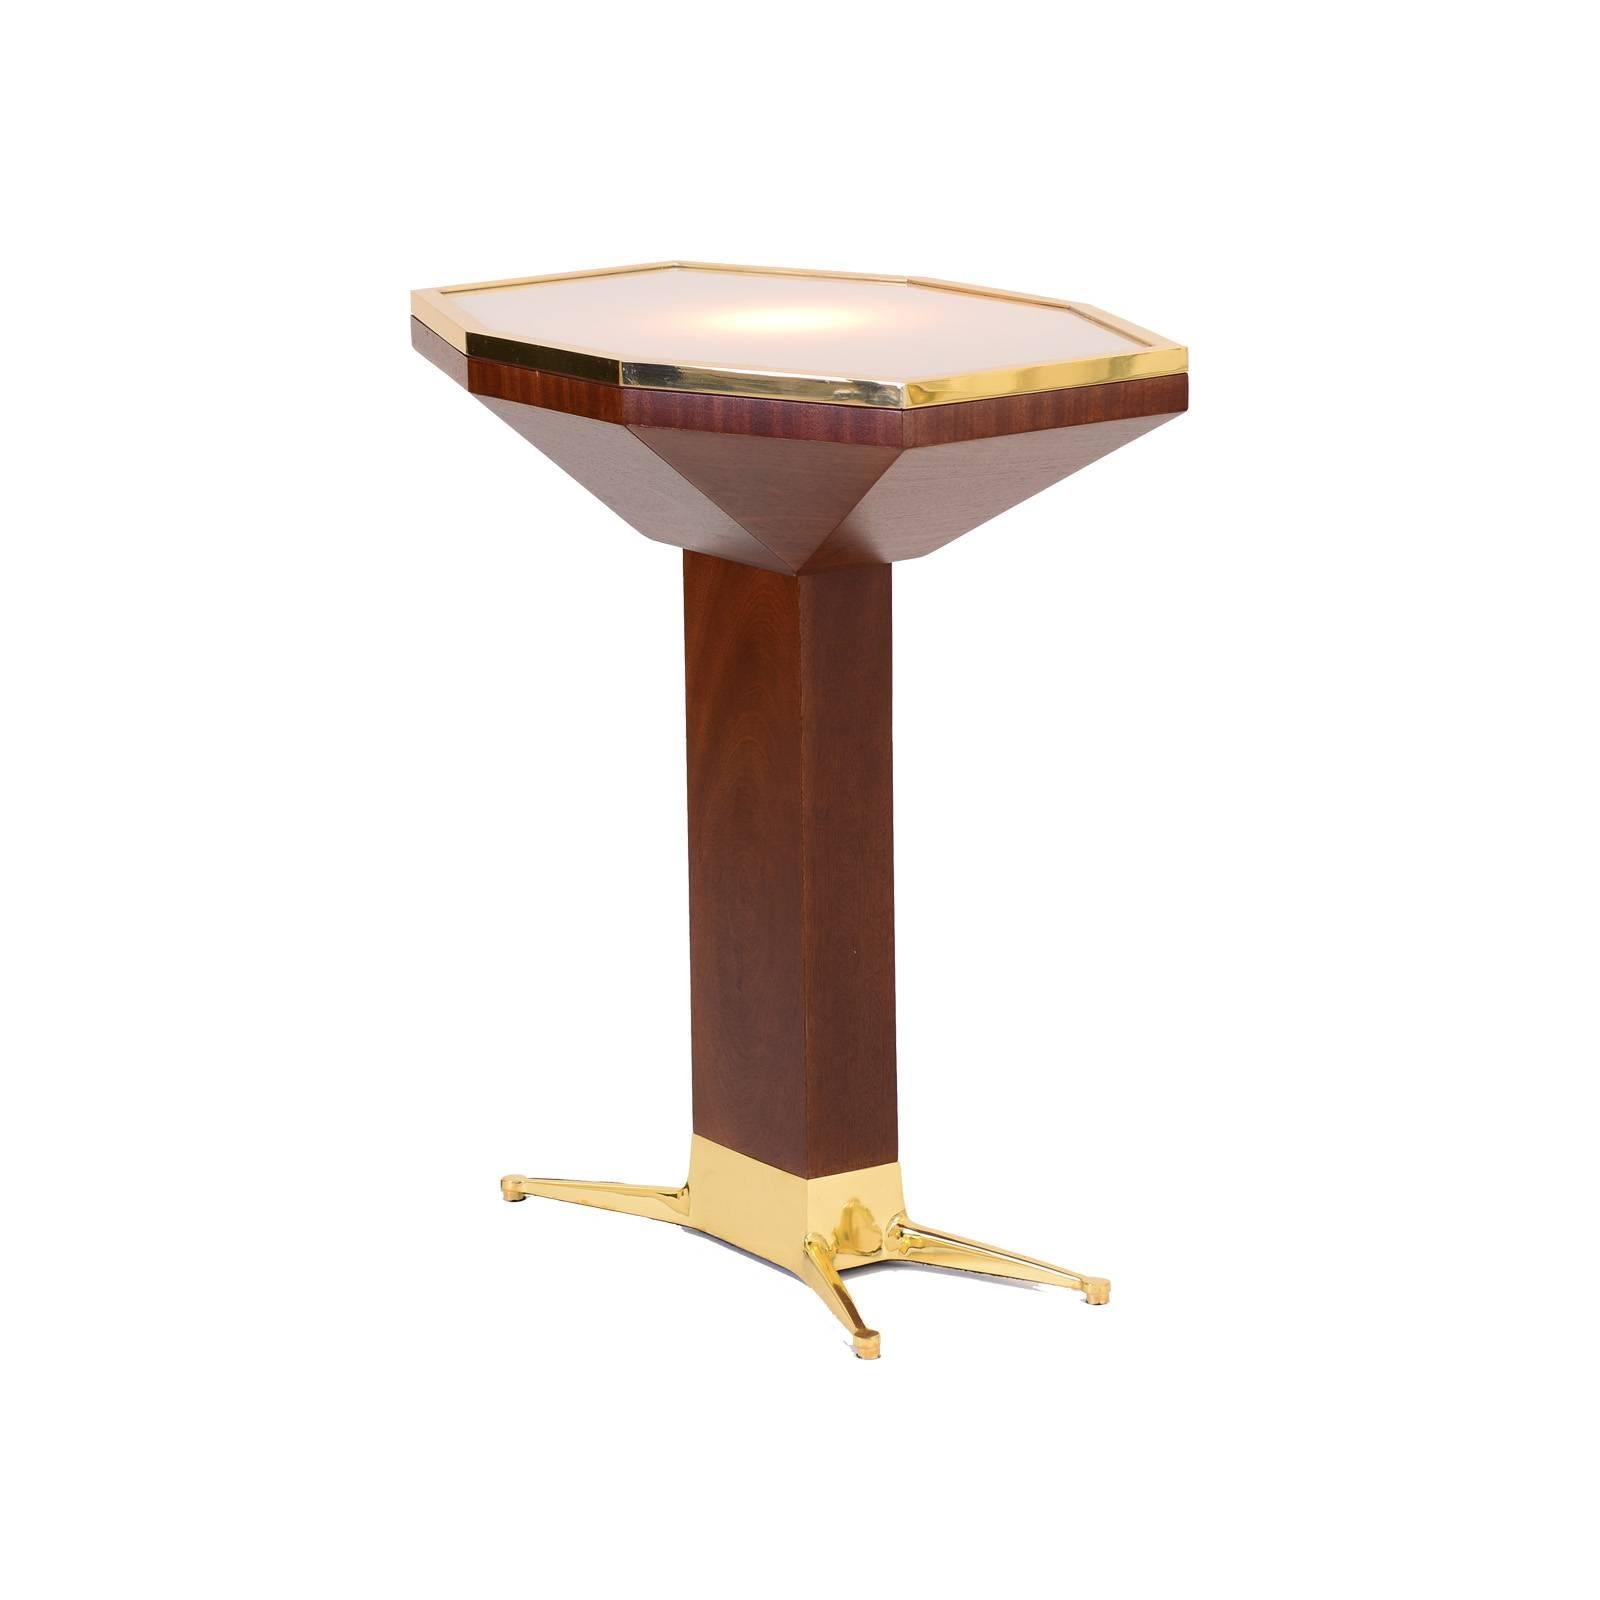 Table designed for the famous Loos-American-Bar at the Kärntner Durchgang in Vienna. Sand casted brass-base, illuminated glass-tabletop.
Now manufactured at the WOKA Workshop in Vienna.

Material: Casted brass base, solid mahogany wood.